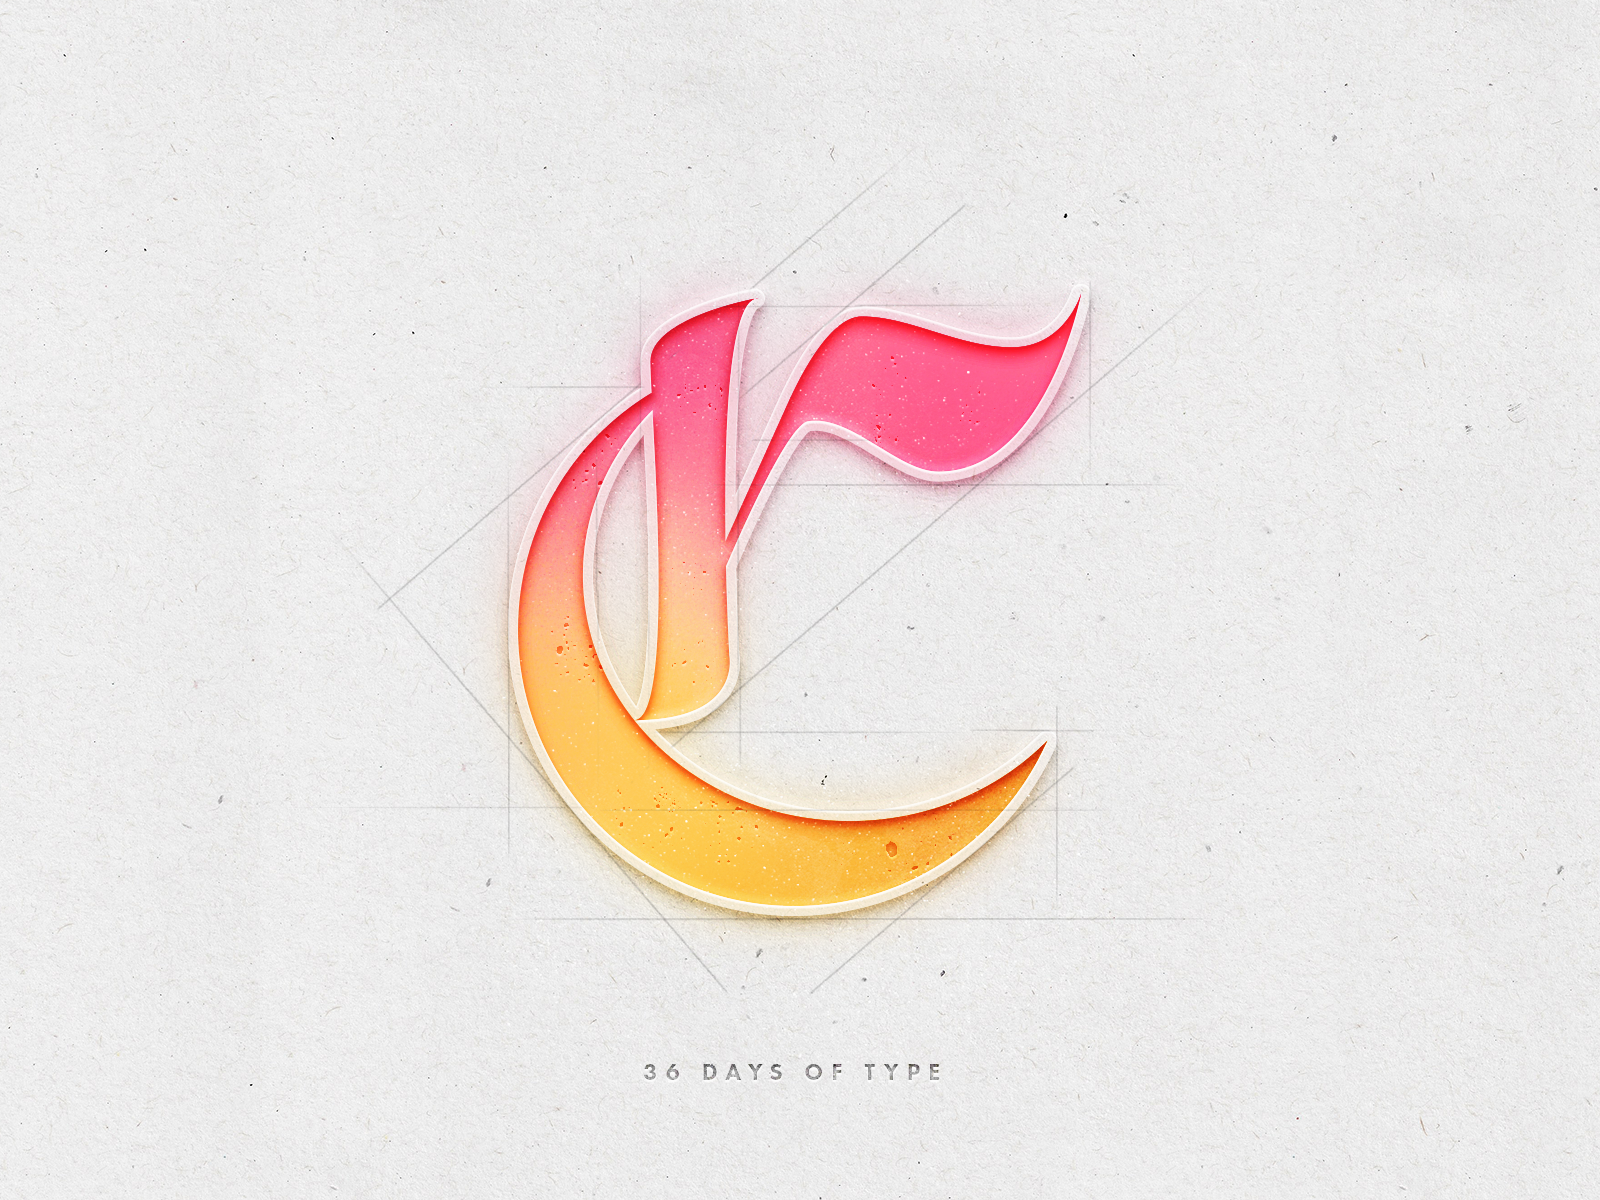 C 36daysoftype calligraphy design illustration lettering letters type